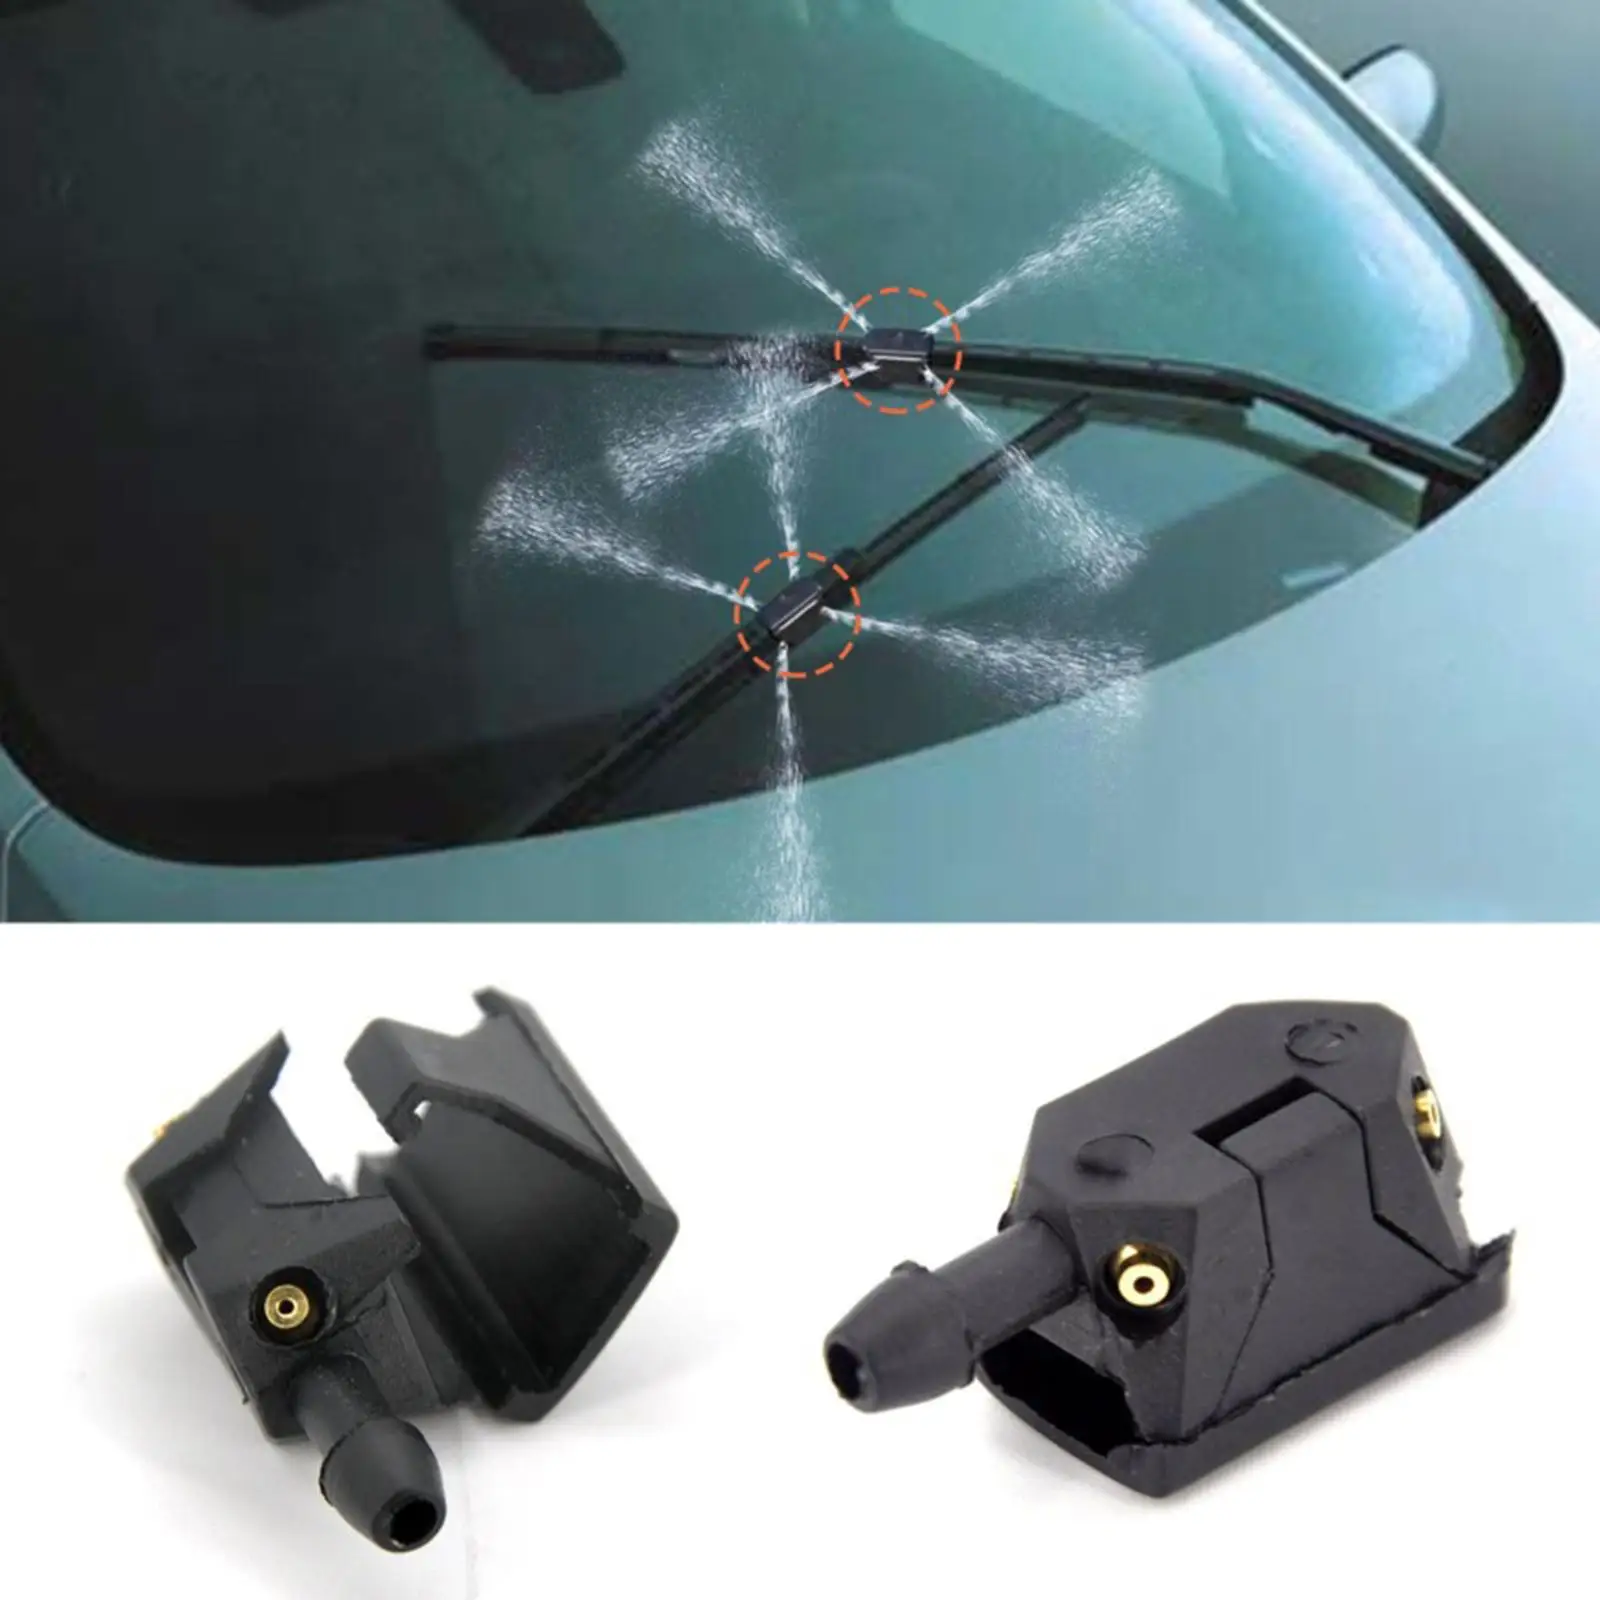 2 Pieces 4 Way Upgrade Car Windscreen Washer Wiper for Car Easy to Install Sturdy Quality Professional